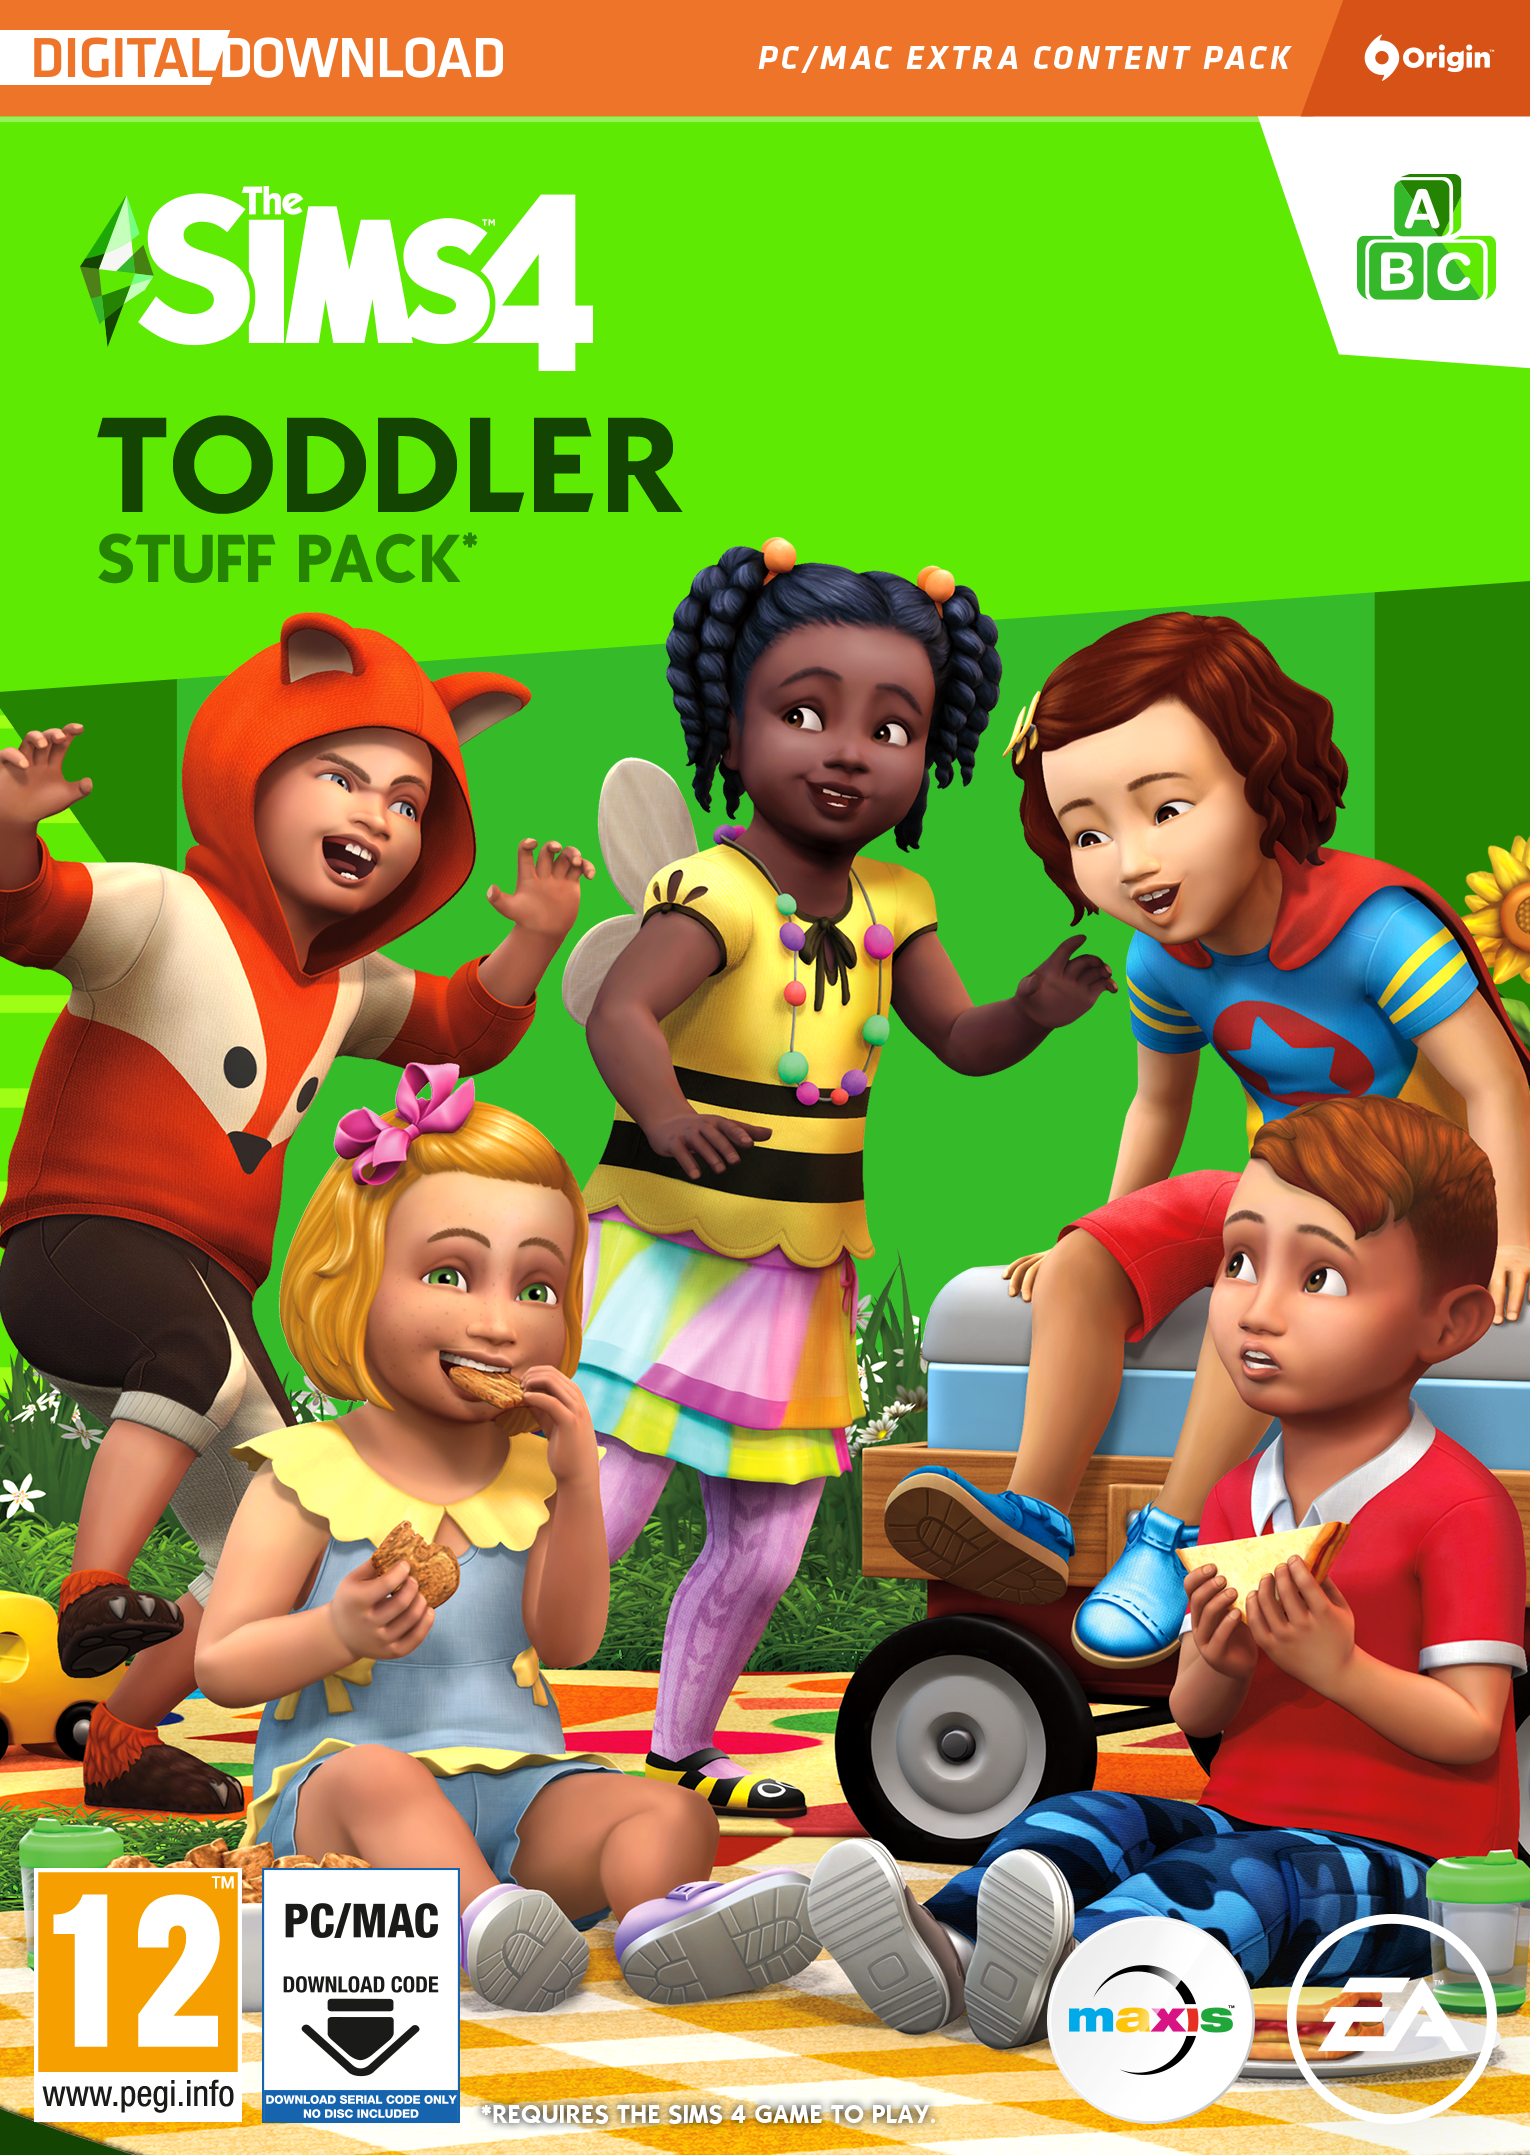 THE SIMS 4 (SP12) TODDLER STUFF